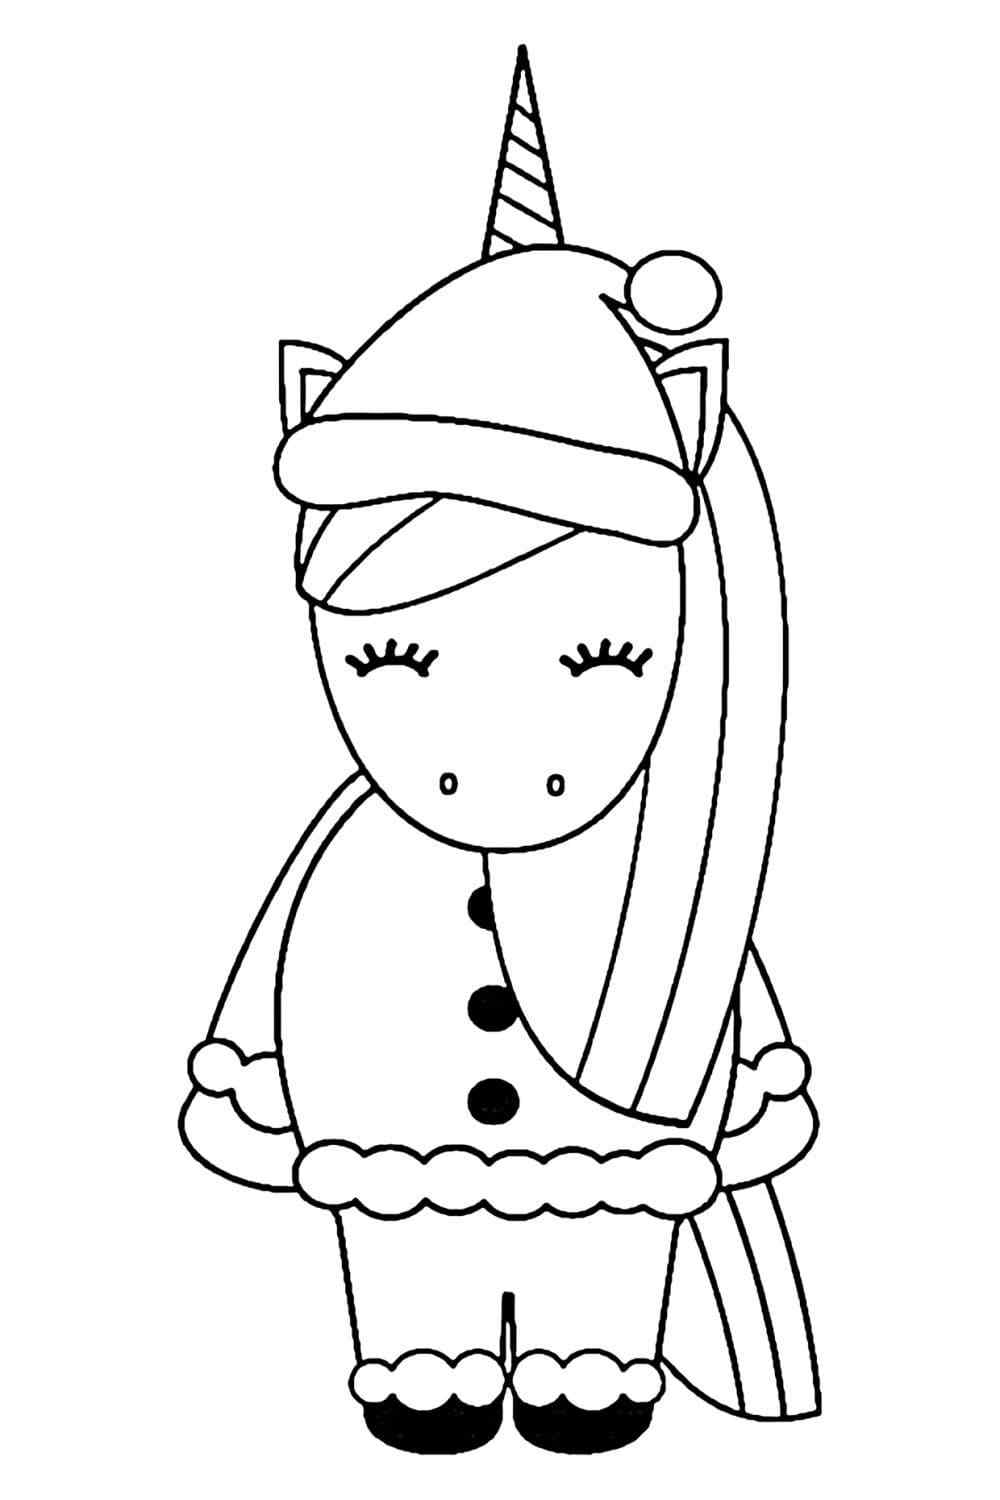 Cute Unicorn Ready To Welcome Christmas Coloring Page